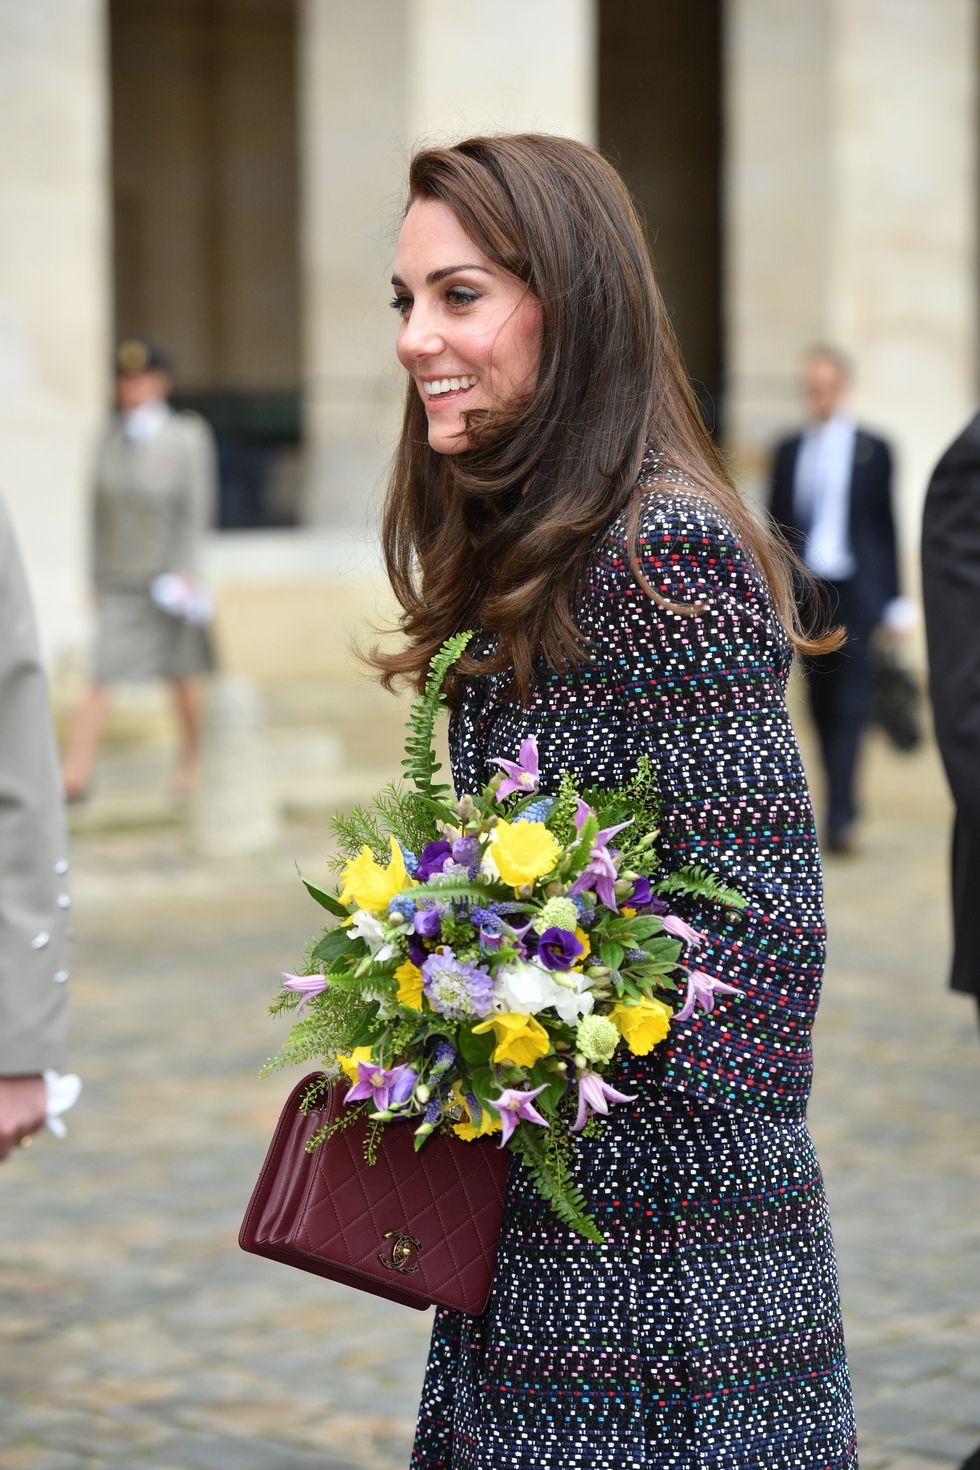 paris, france march 18 catherine, duchess of cambridge visits the invalides on march 18, 2017 in paris, france the duke and duchess are on a two day tour of france photo by poolsamir husseinwireimage